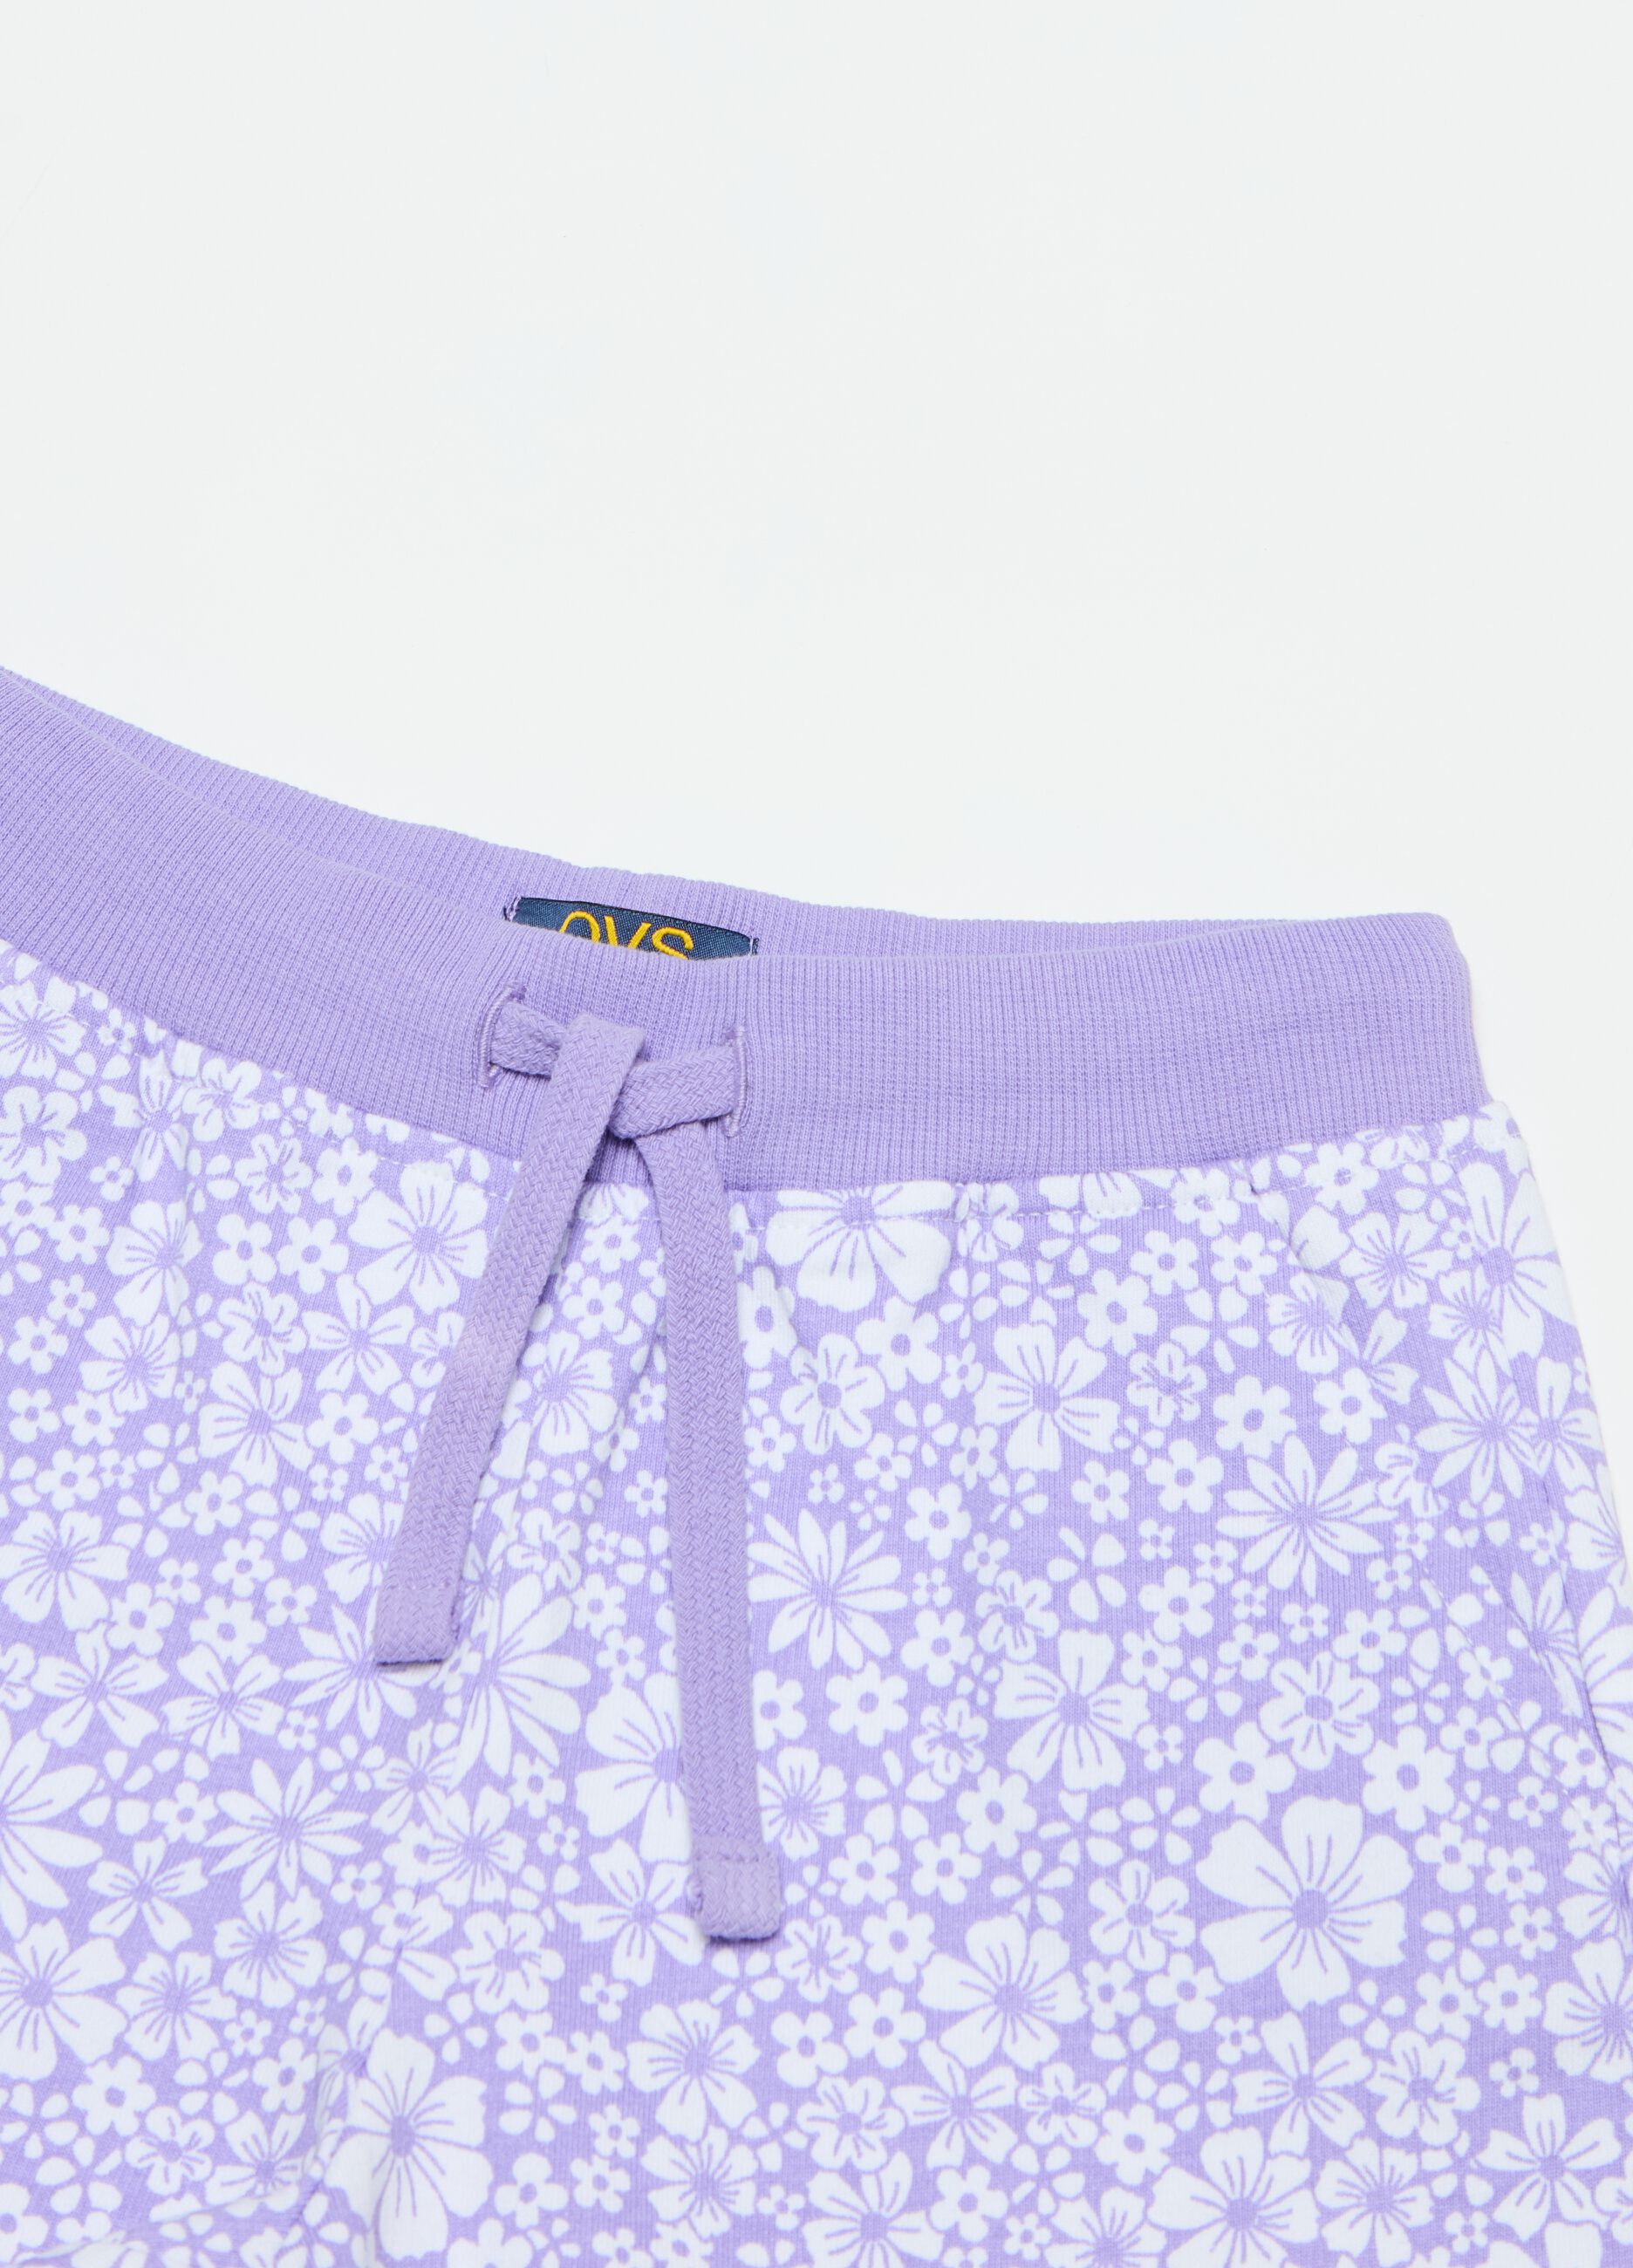 Shorts with drawstring and small flowers print